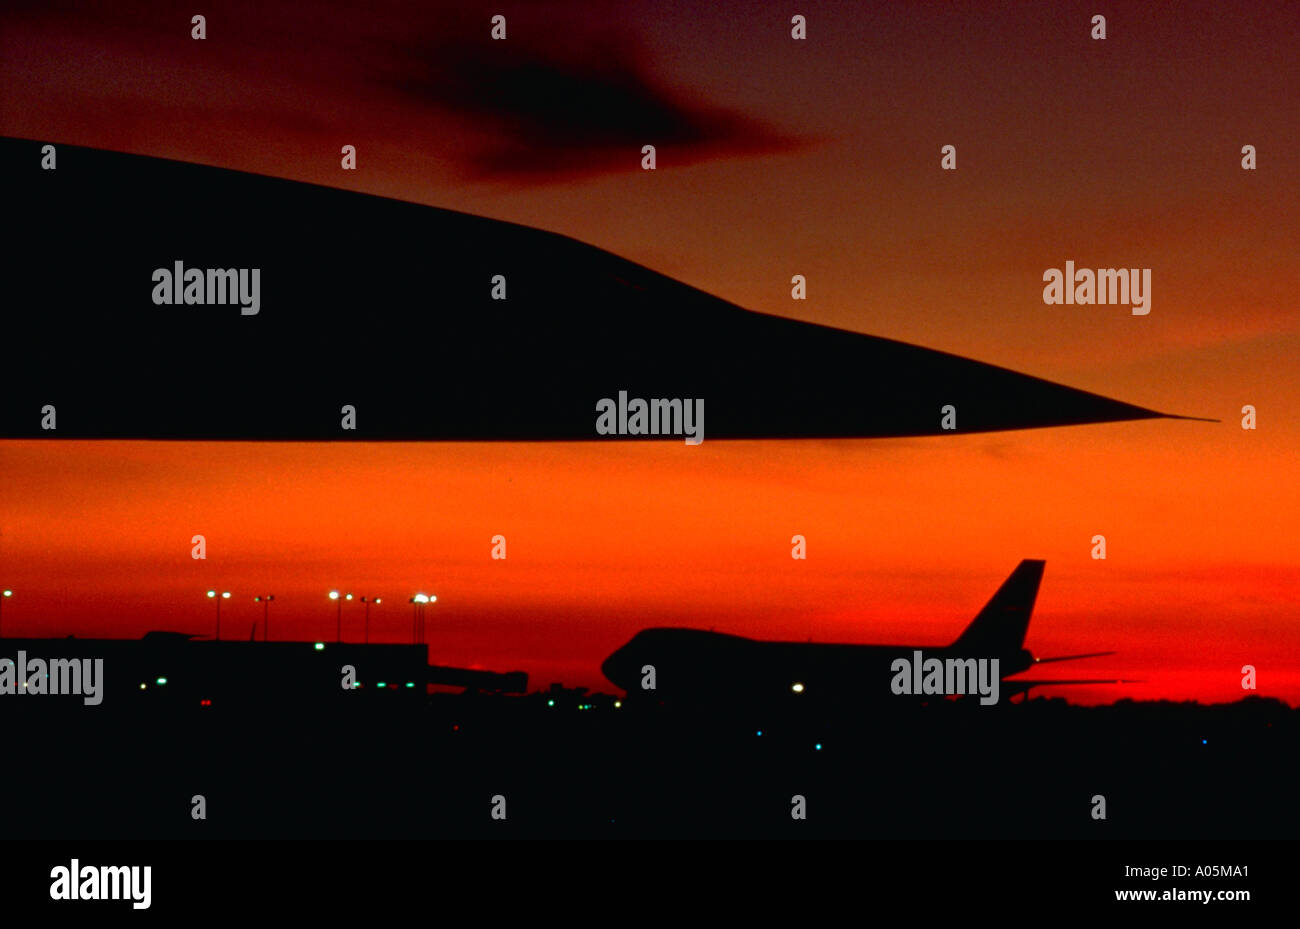 The distinctive pointed nose of the Concorde towers above the silhouette of a 747 against a Florida sunset sky Stock Photo